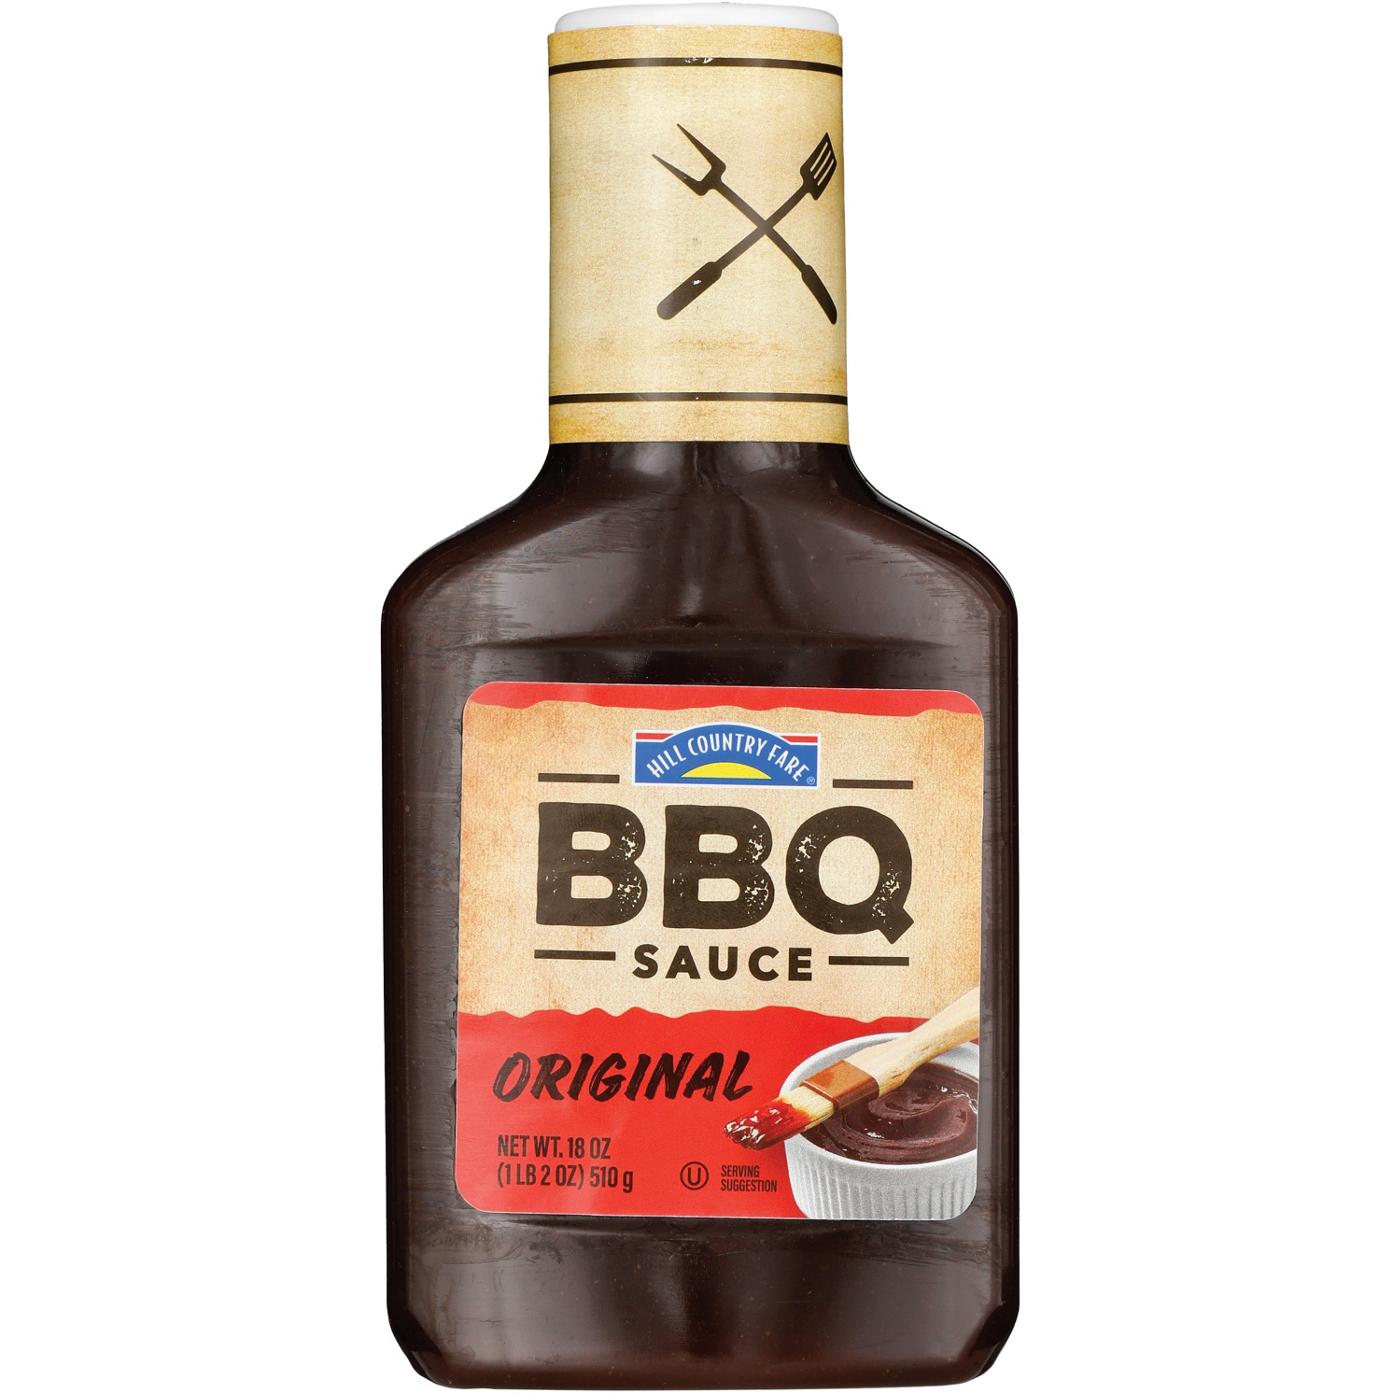 Hill Country Fare Original BBQ Sauce; image 1 of 2